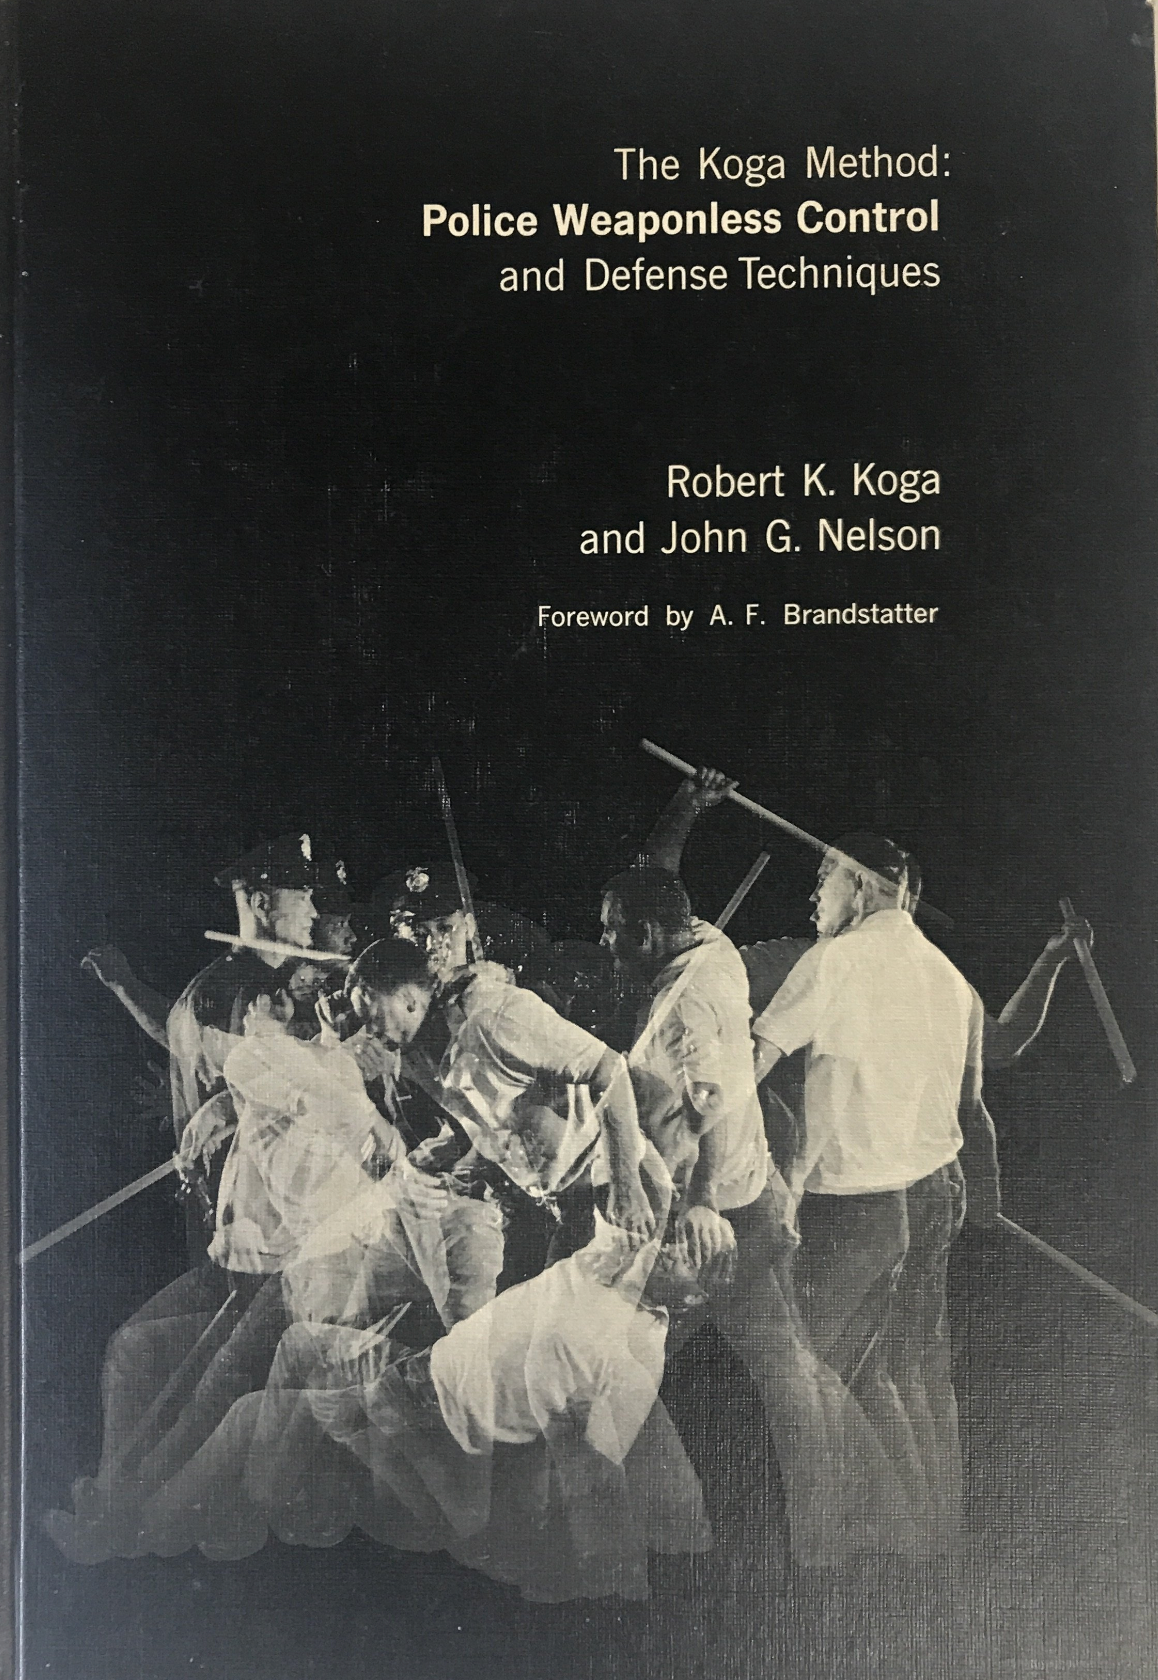 The Koga Method: Police Weaponless Control and Defense Techniques Book by Robert Koga (Preowned) - Budovideos Inc